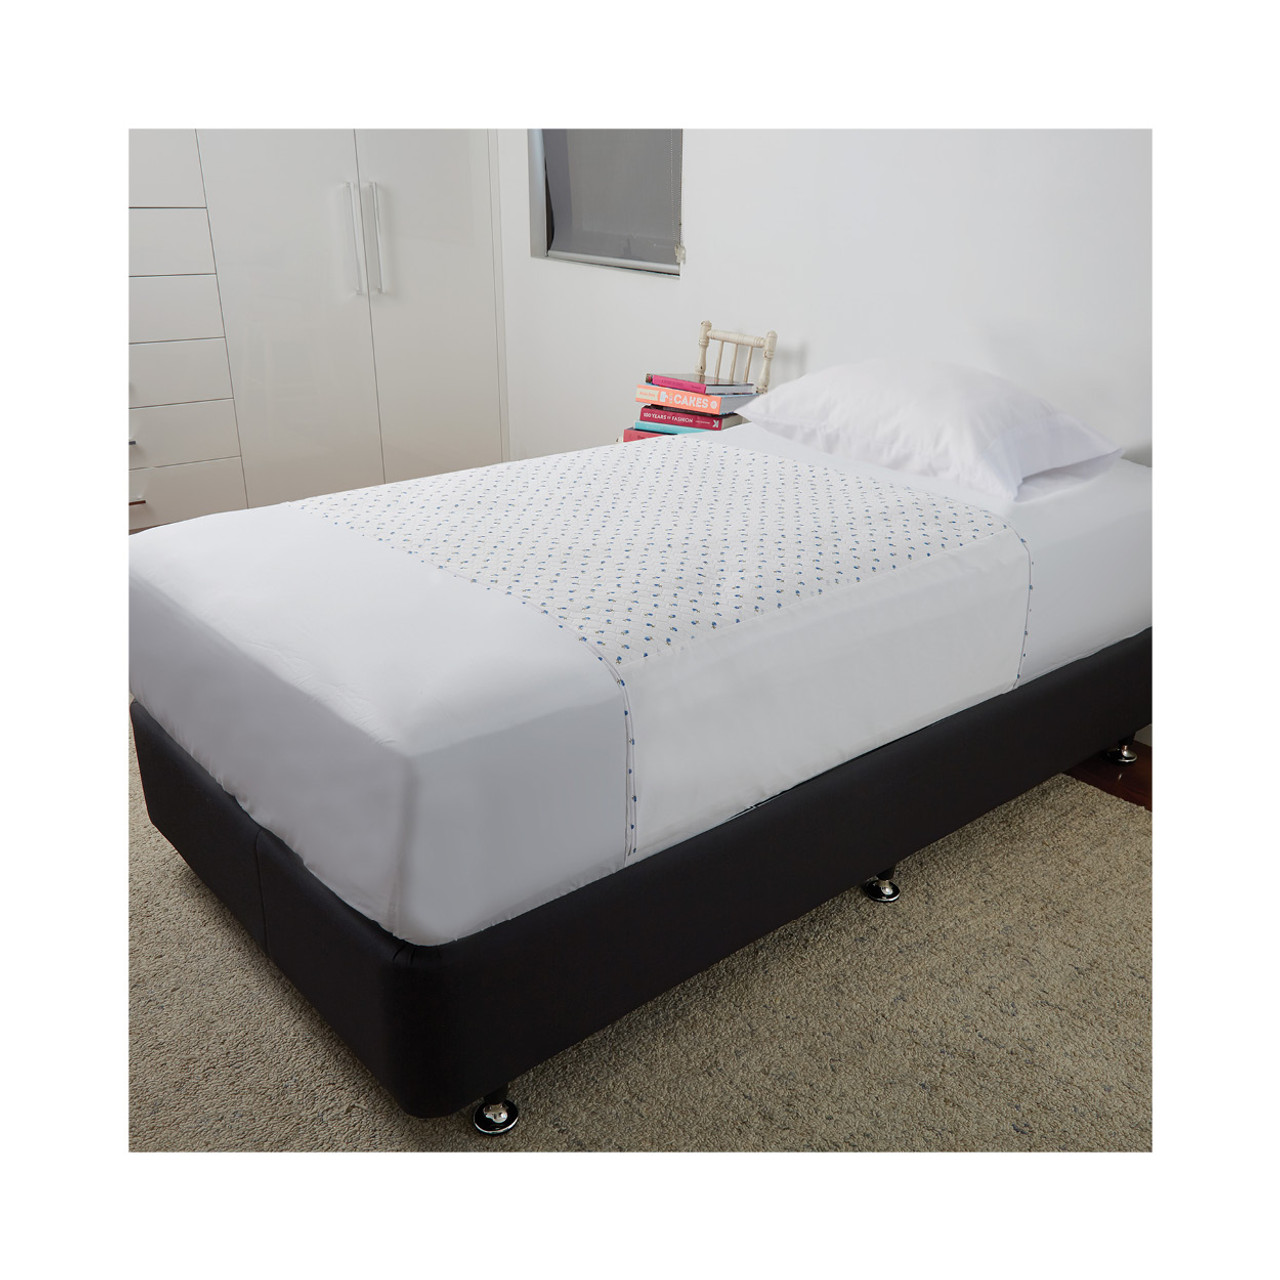 Buddies All Nighter W/Proof Bed Pad 1mx1m, 3000ml with Tuck-ins